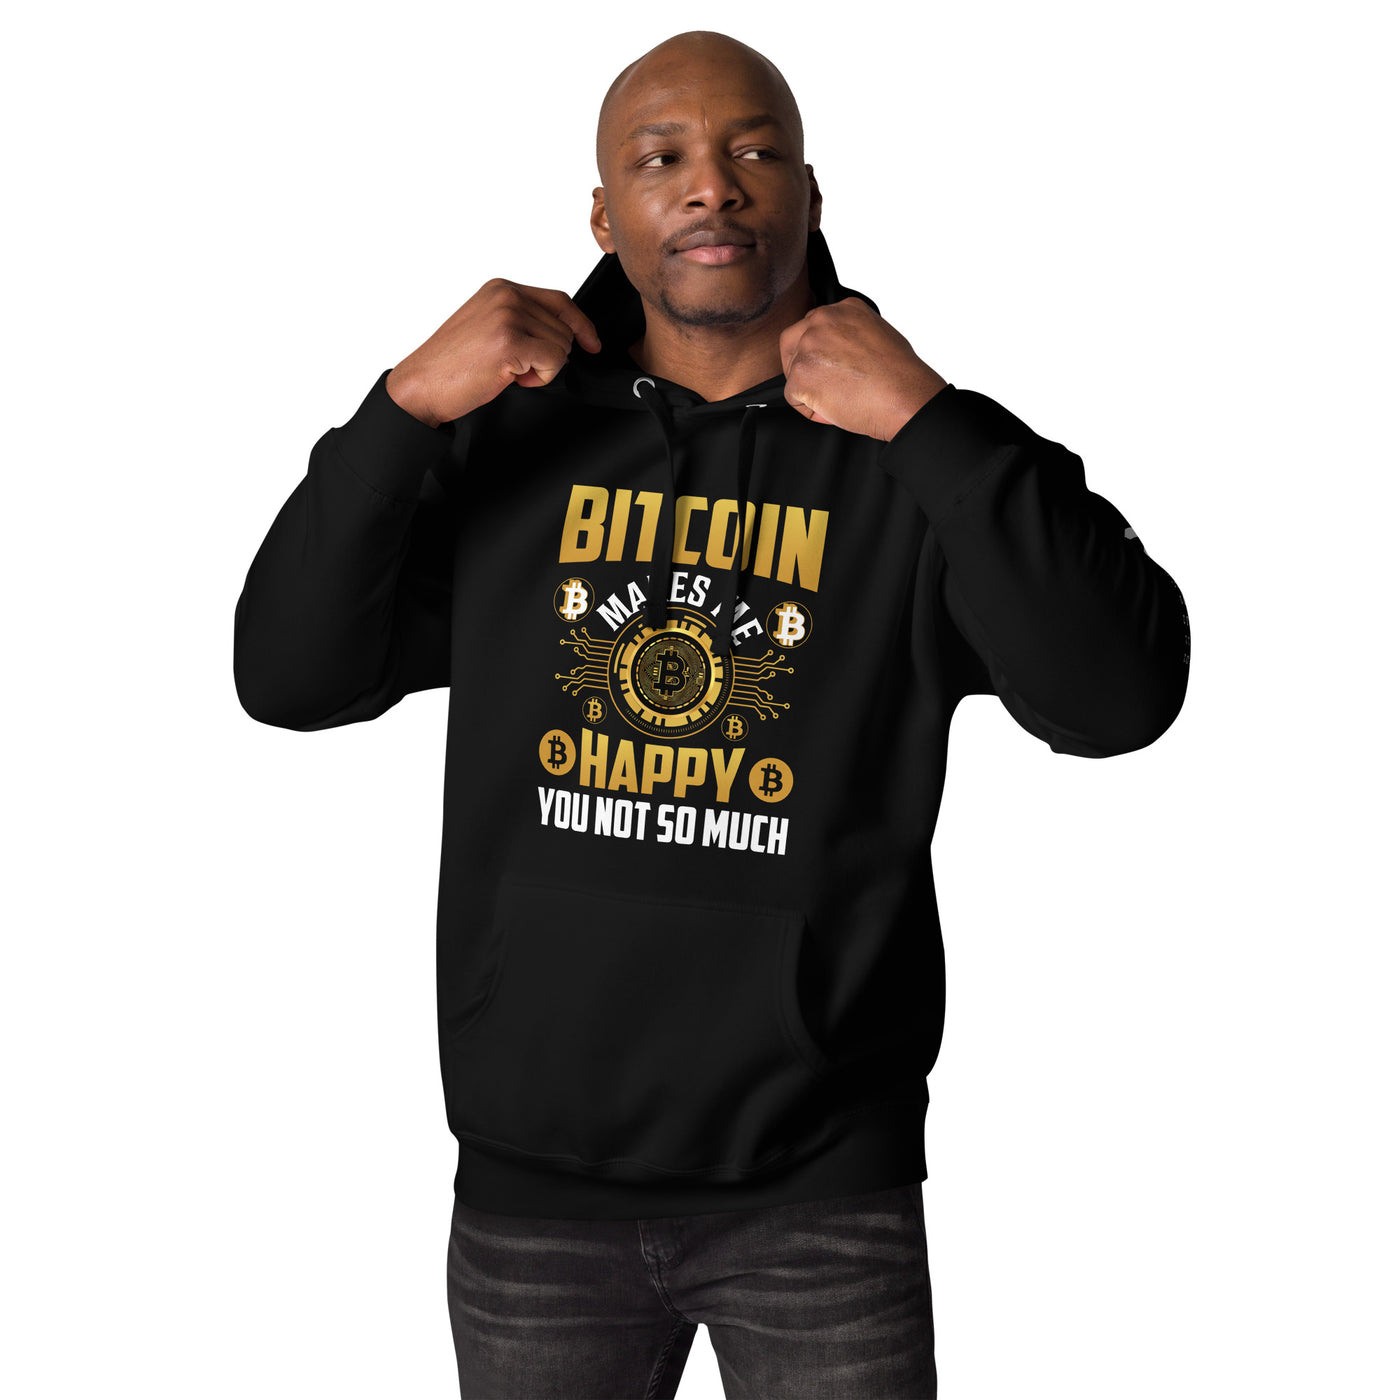 Bitcoin Makes me Happy, you Not so much - Unisex Hoodie